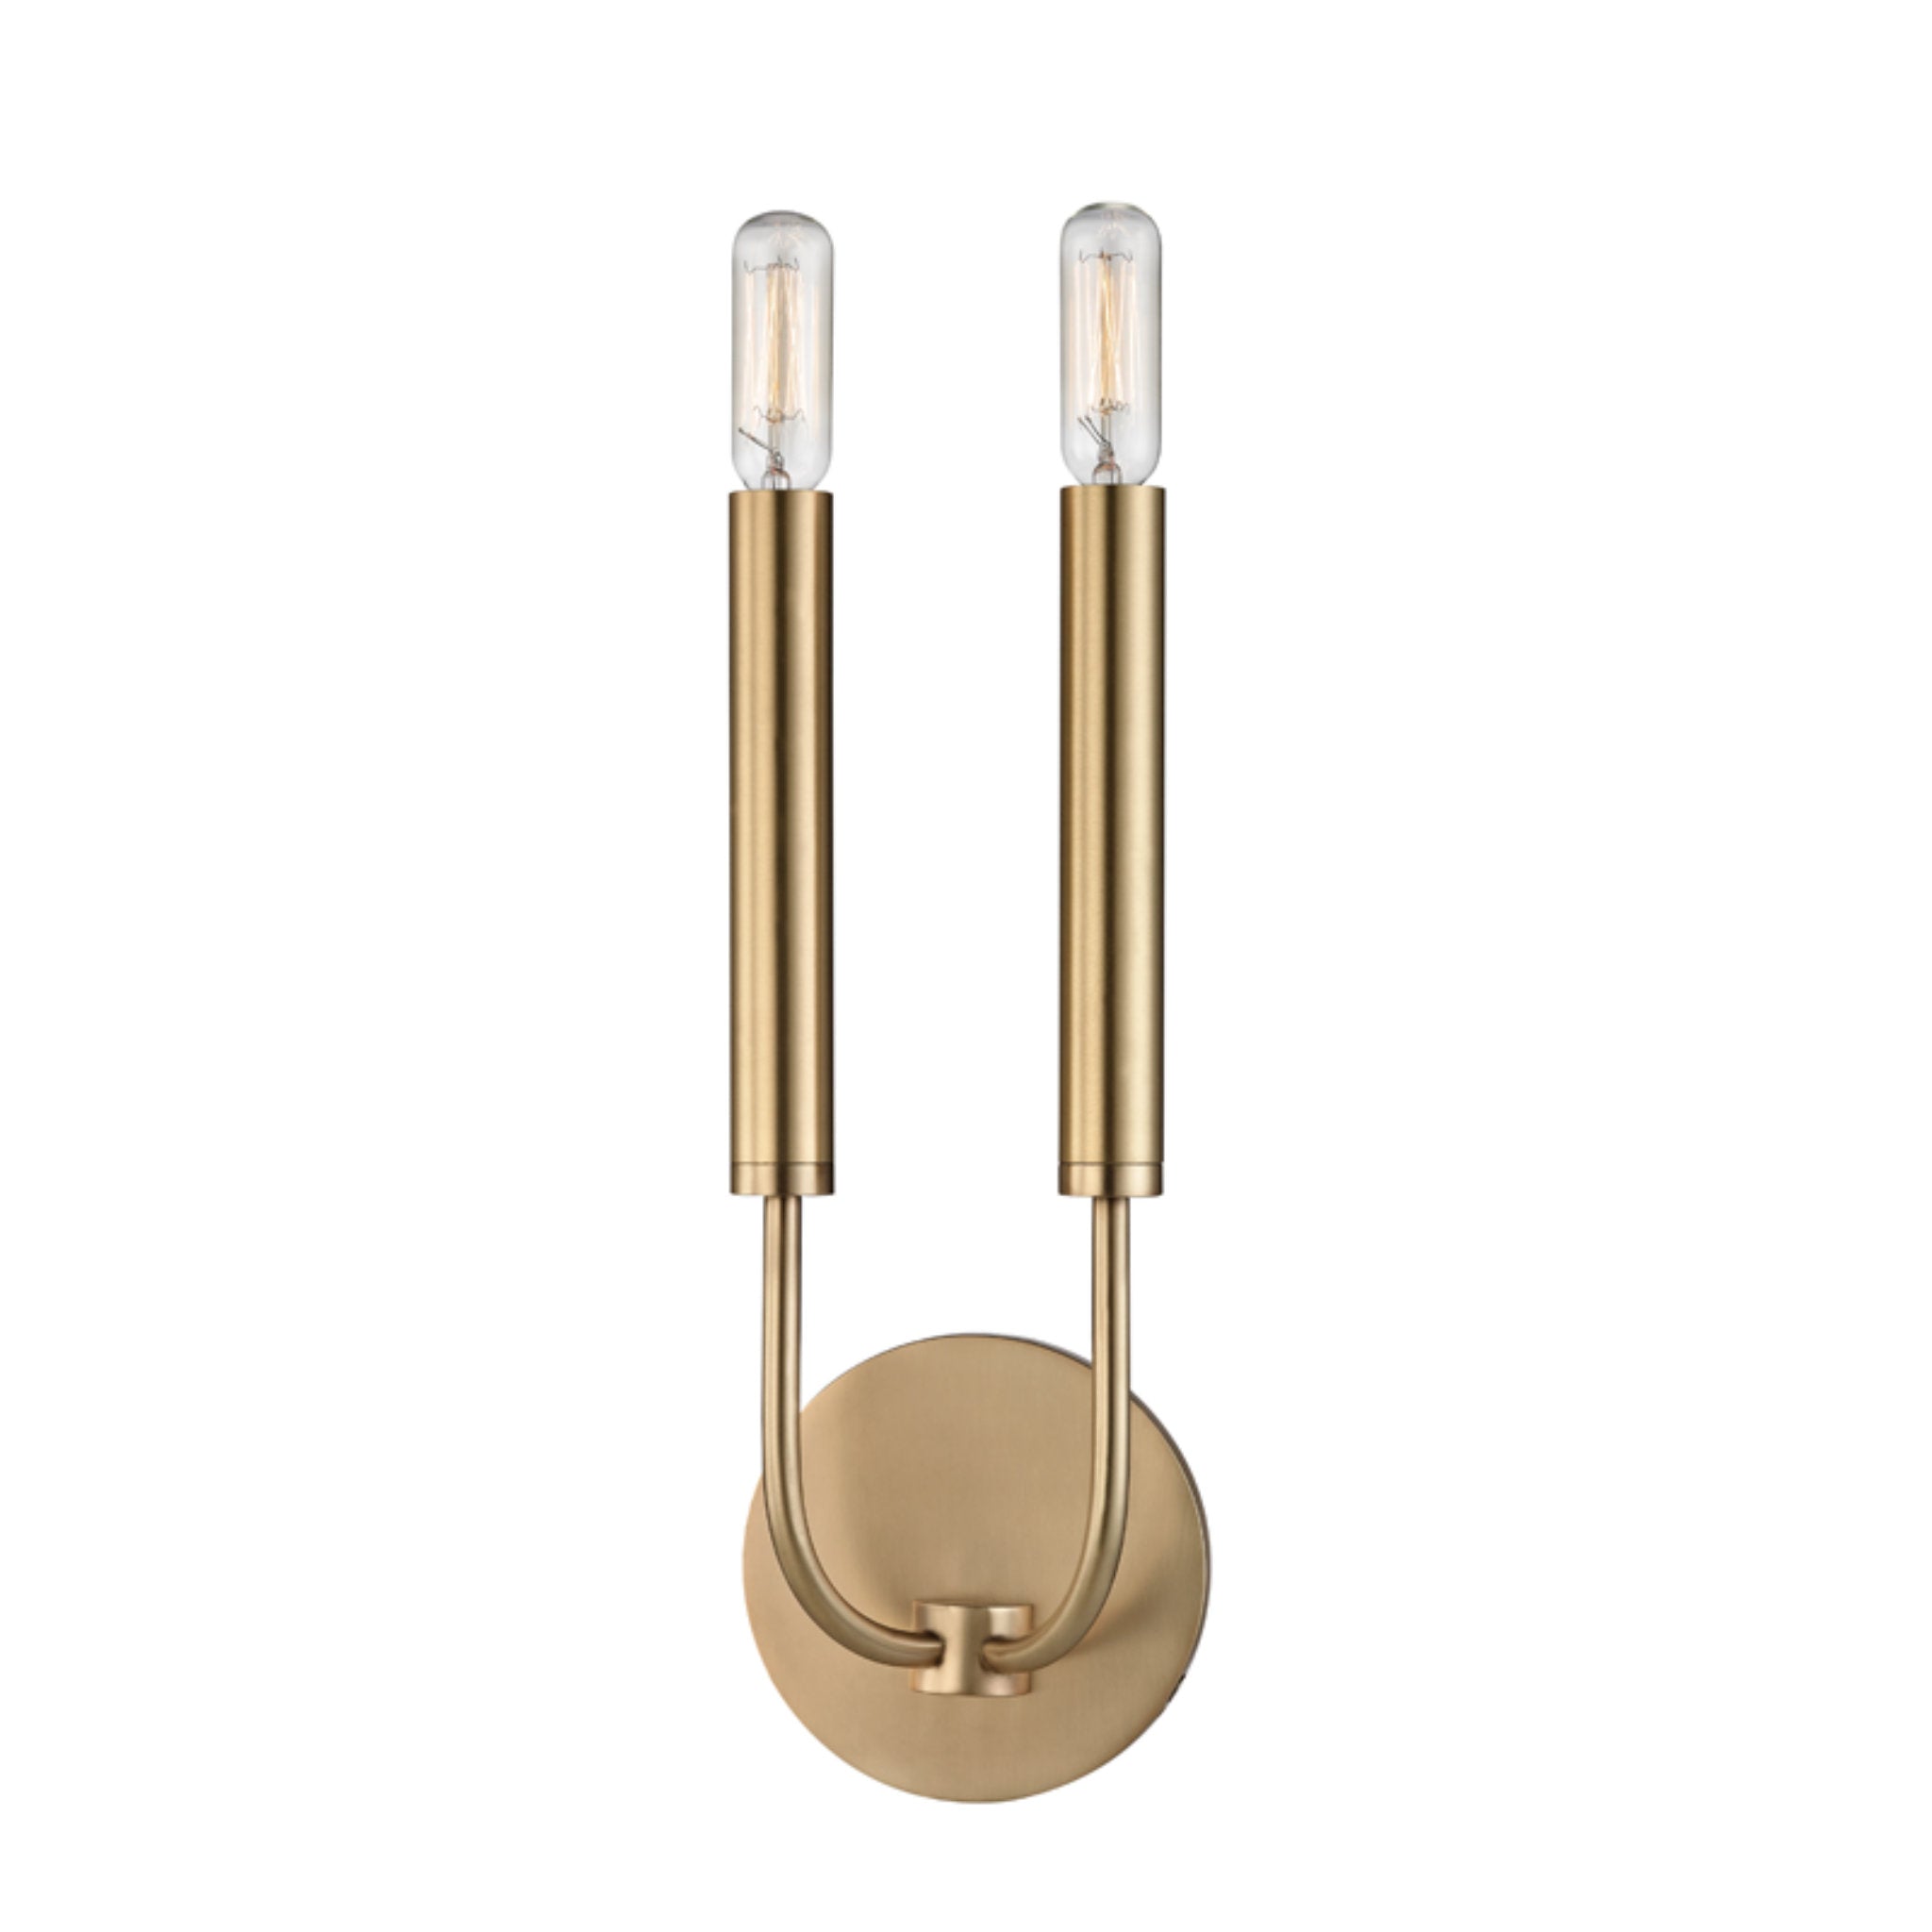 Gideon 2 Light Wall Sconce in Aged Brass